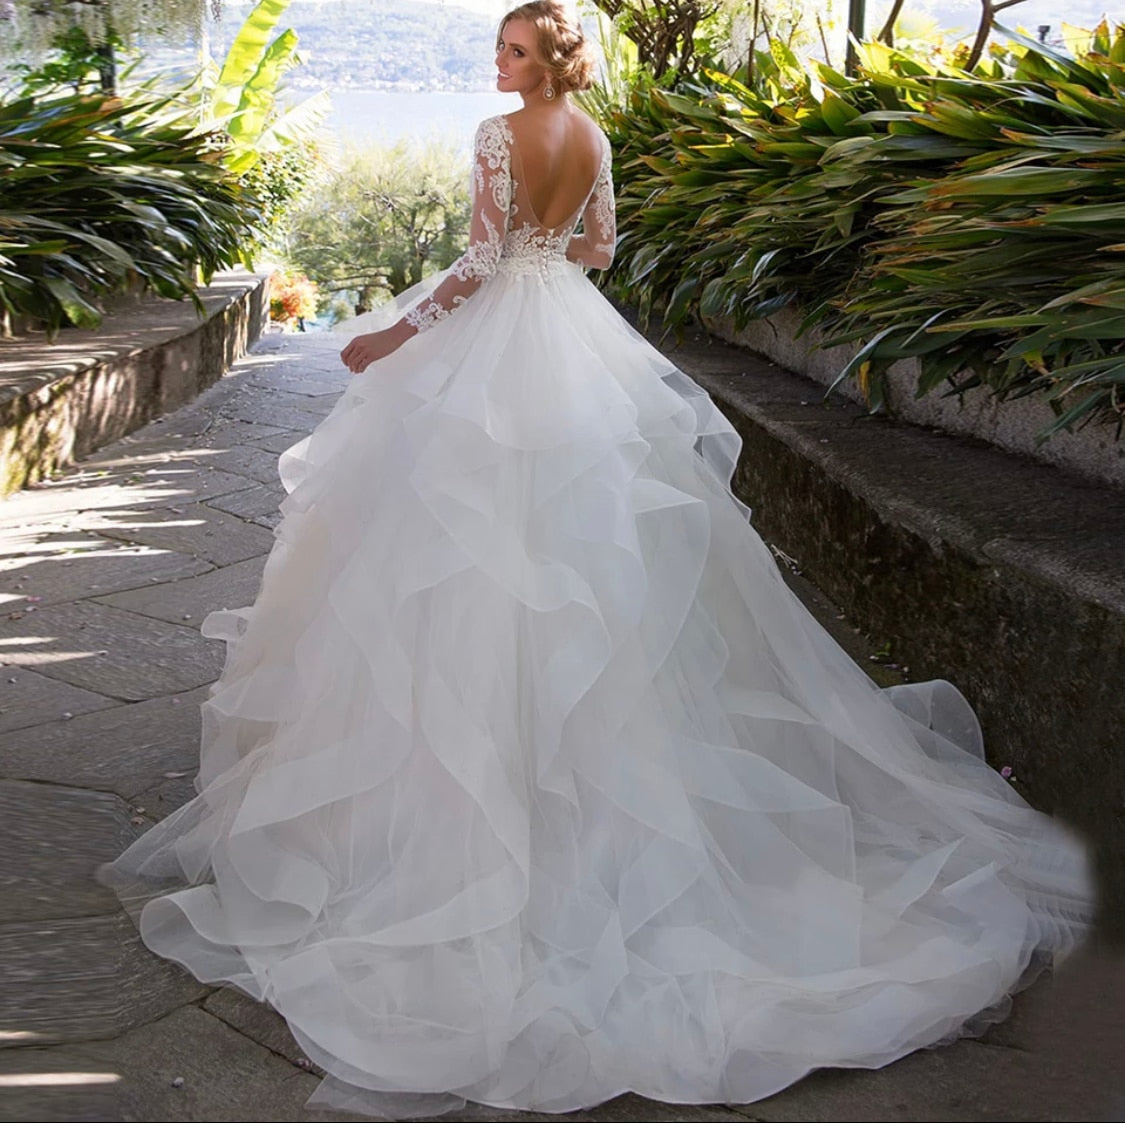 Tiered Ruffled Tulle Lace A Line Princess Wedding Bridal Gown – TulleLux  Bridal Crowns & Accessories